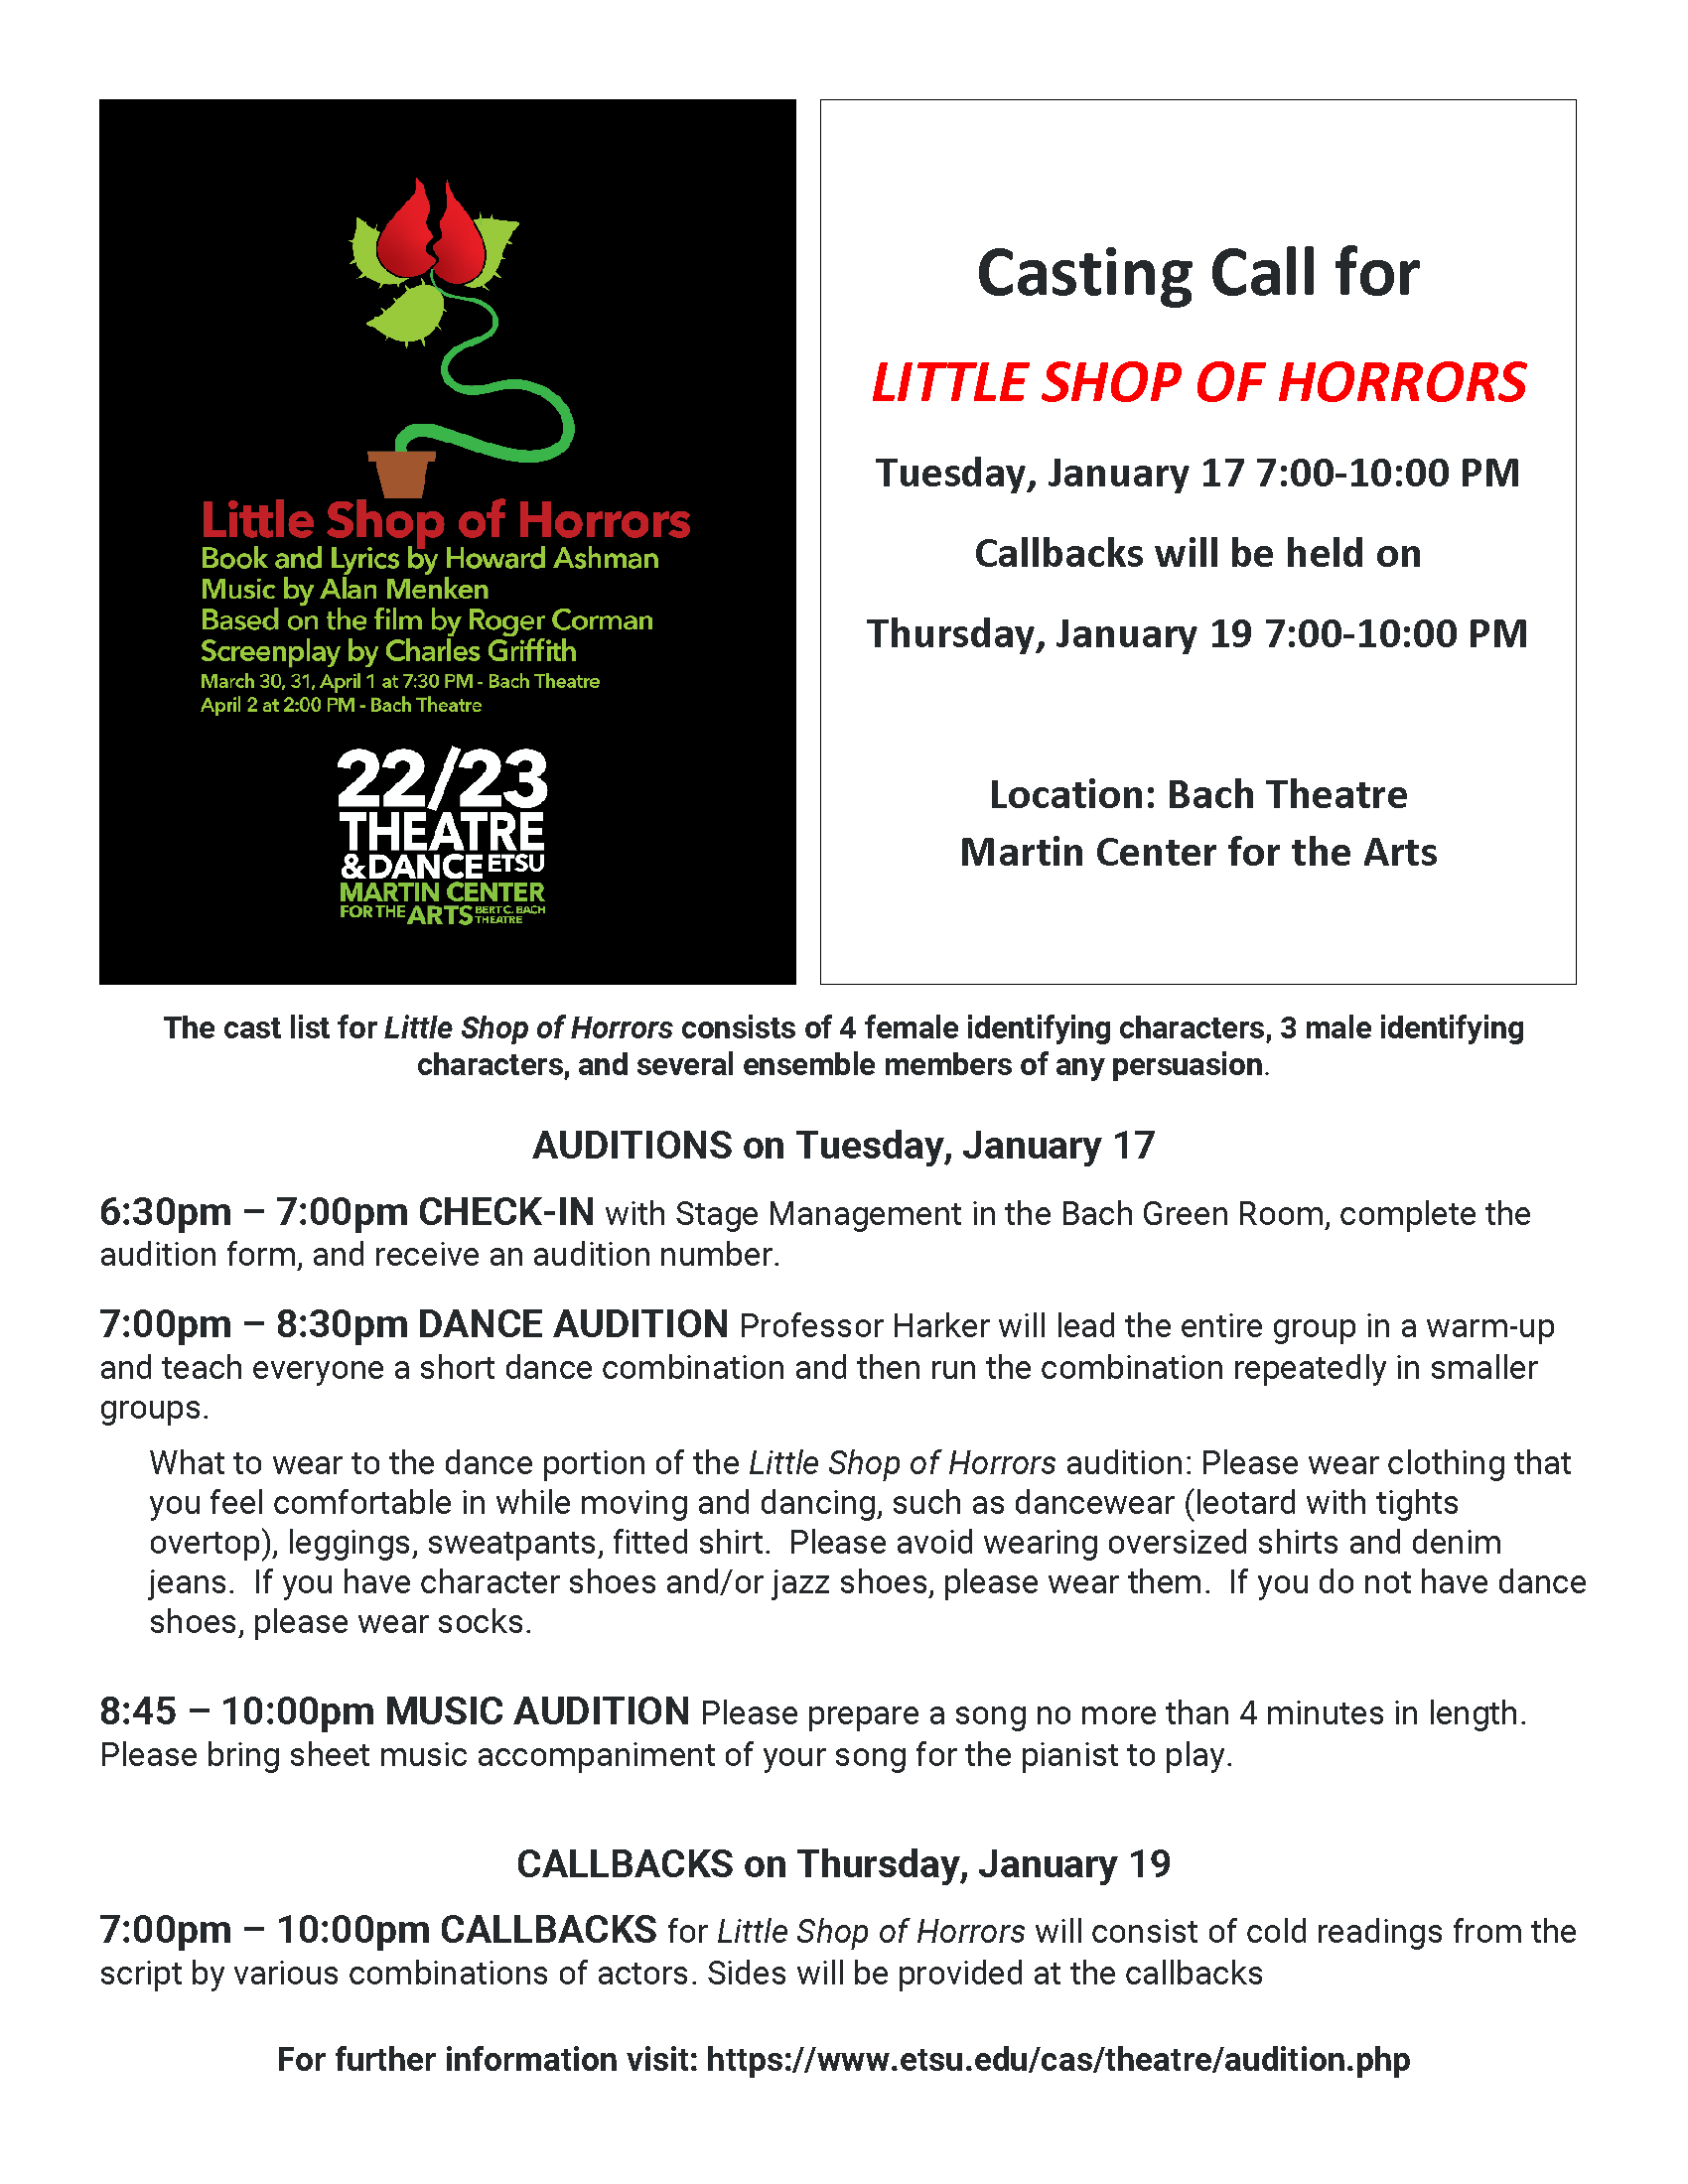 Little Shop of Horrors Audition flyer